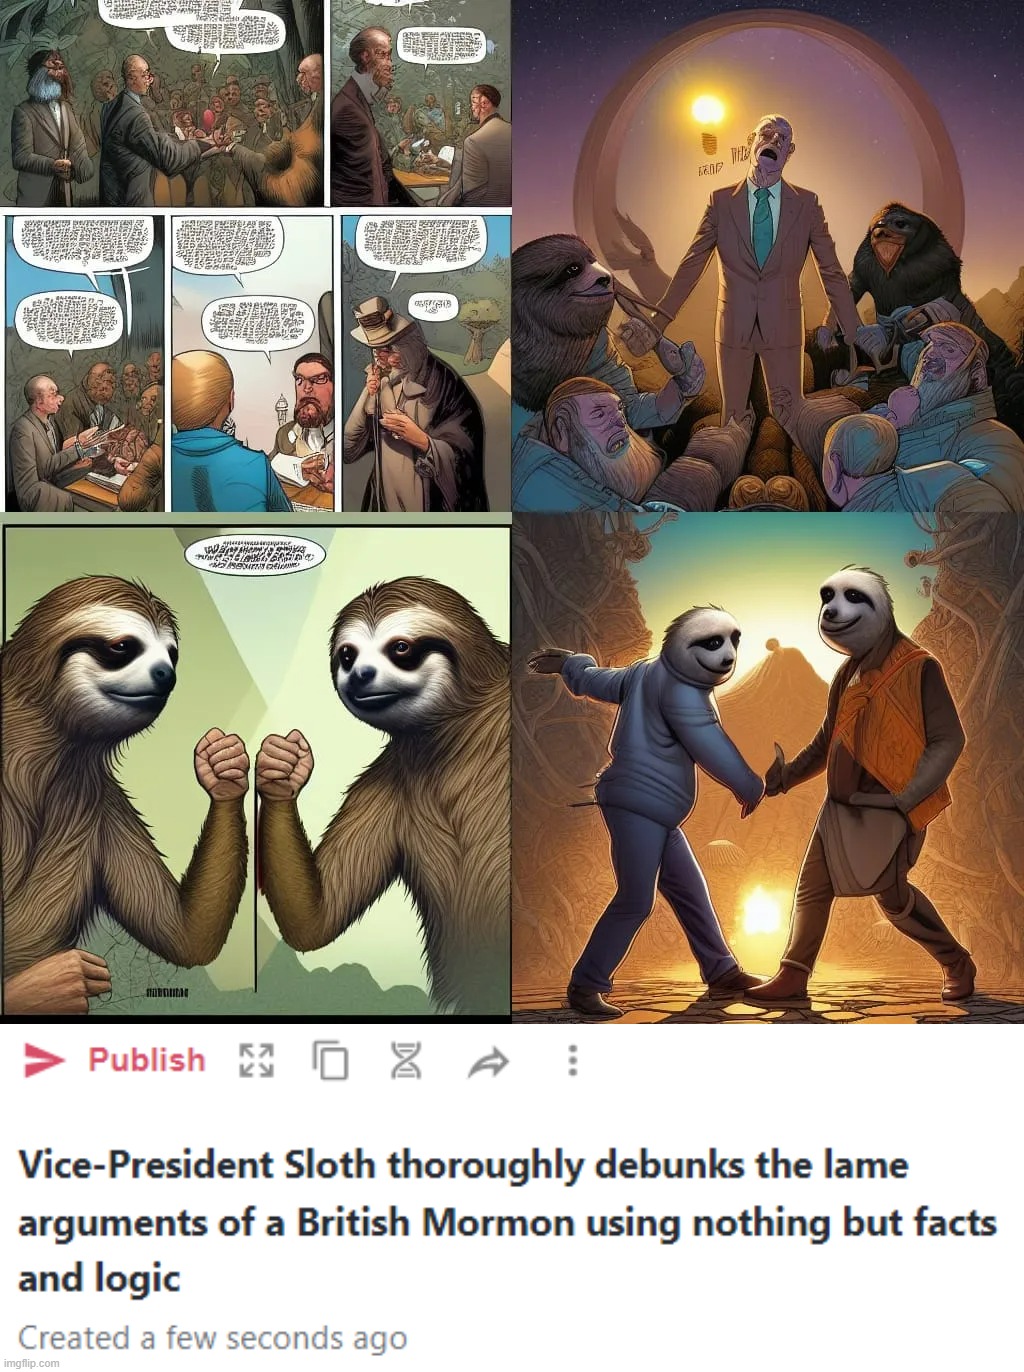 Facts & logic, bro. Facts & logic. #TurningPointSloth | image tagged in vice-president sloth thoroughly debunks the lame arguments of a,turning,point,sloth,facts,logic | made w/ Imgflip meme maker